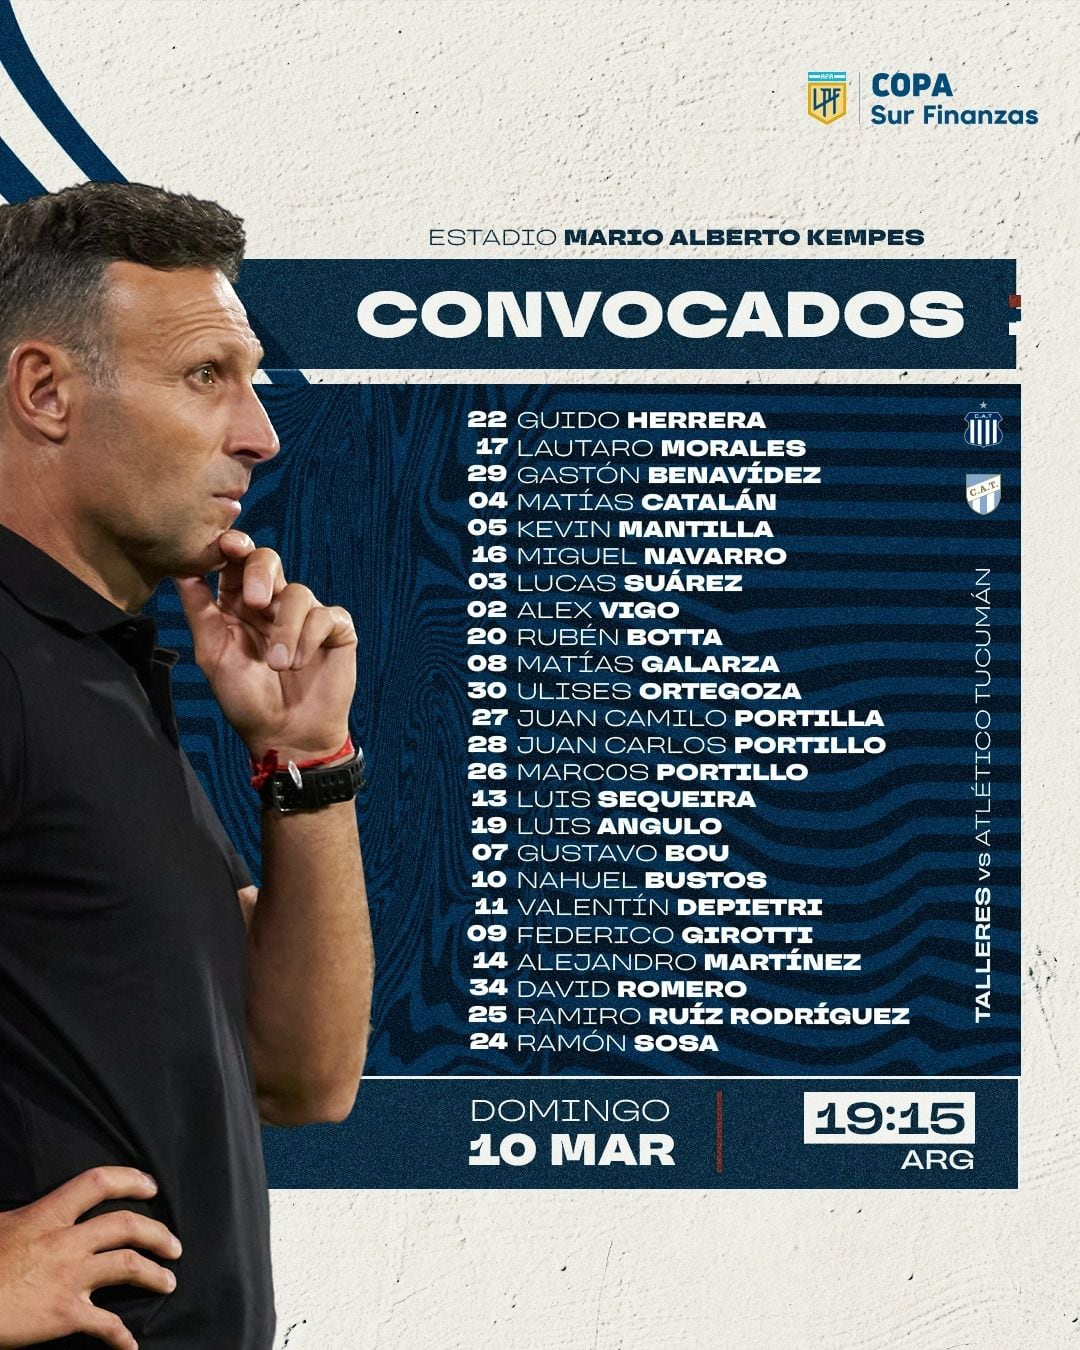 Talleres will face bottom team Atlético Tucumán, in principle without rotation.